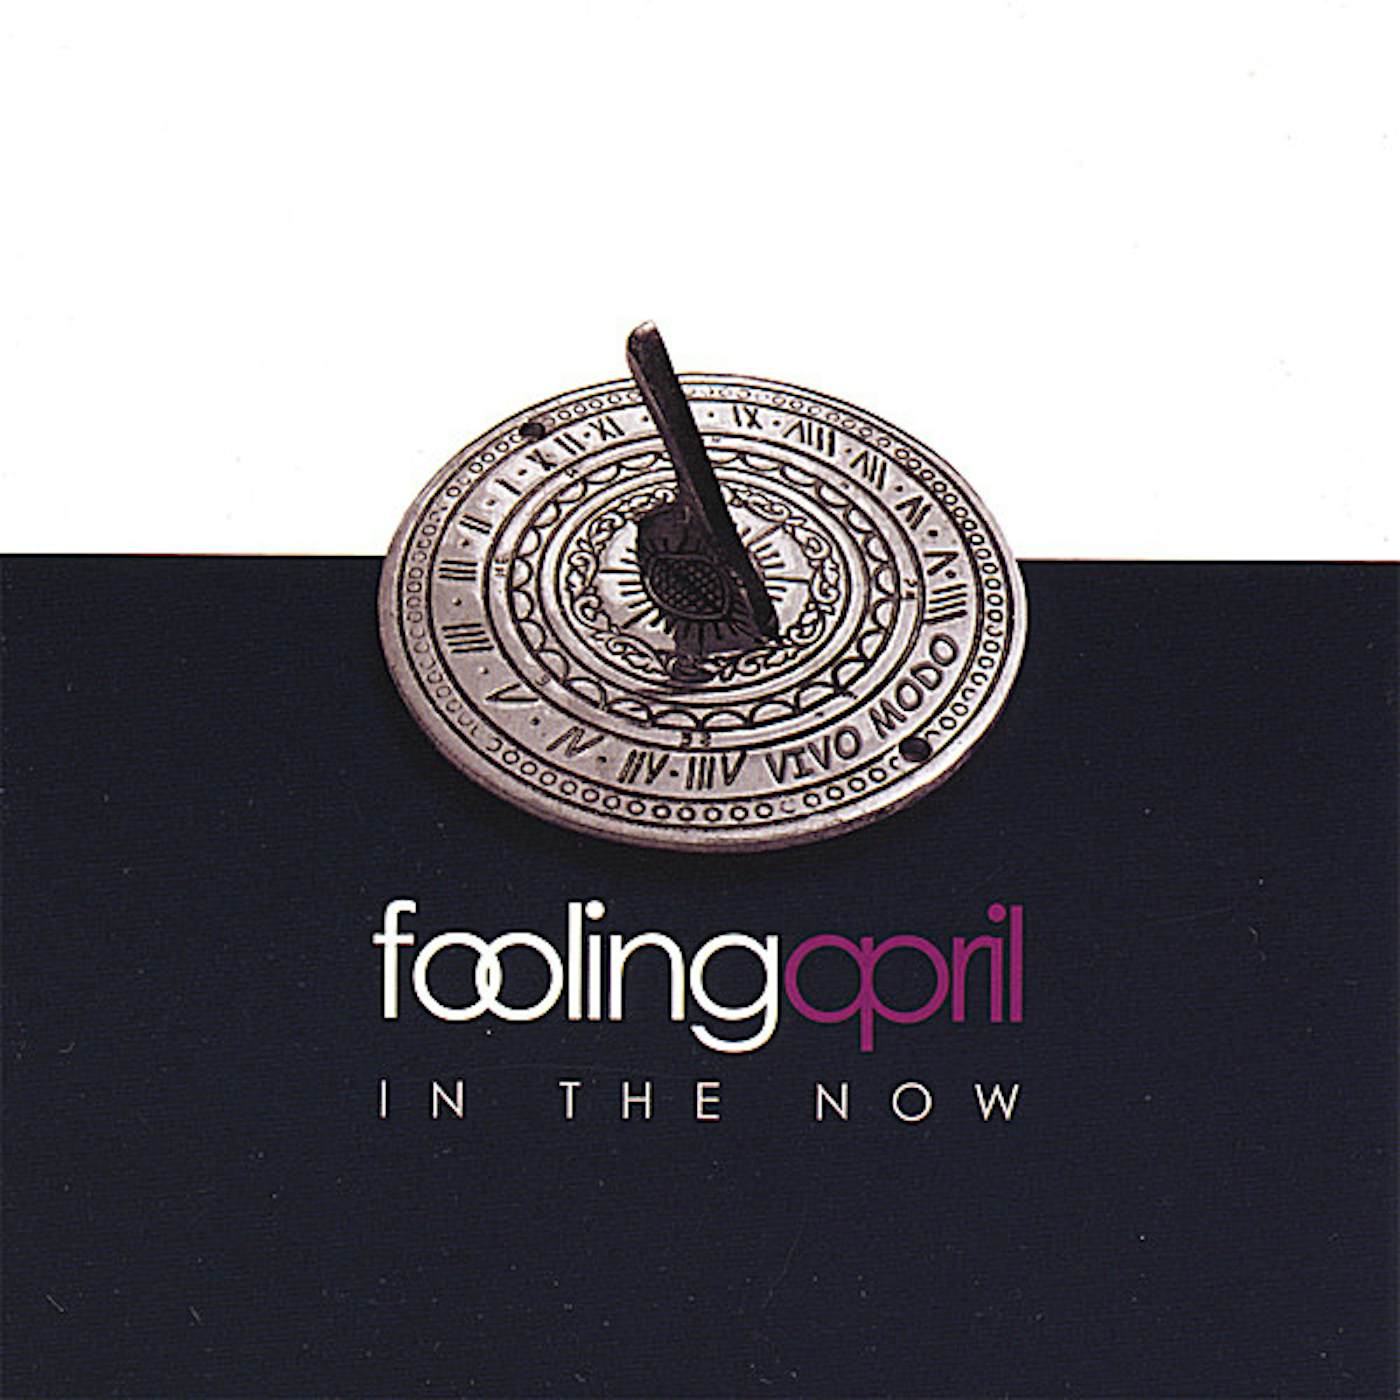 Fooling April IN THE NOW CD